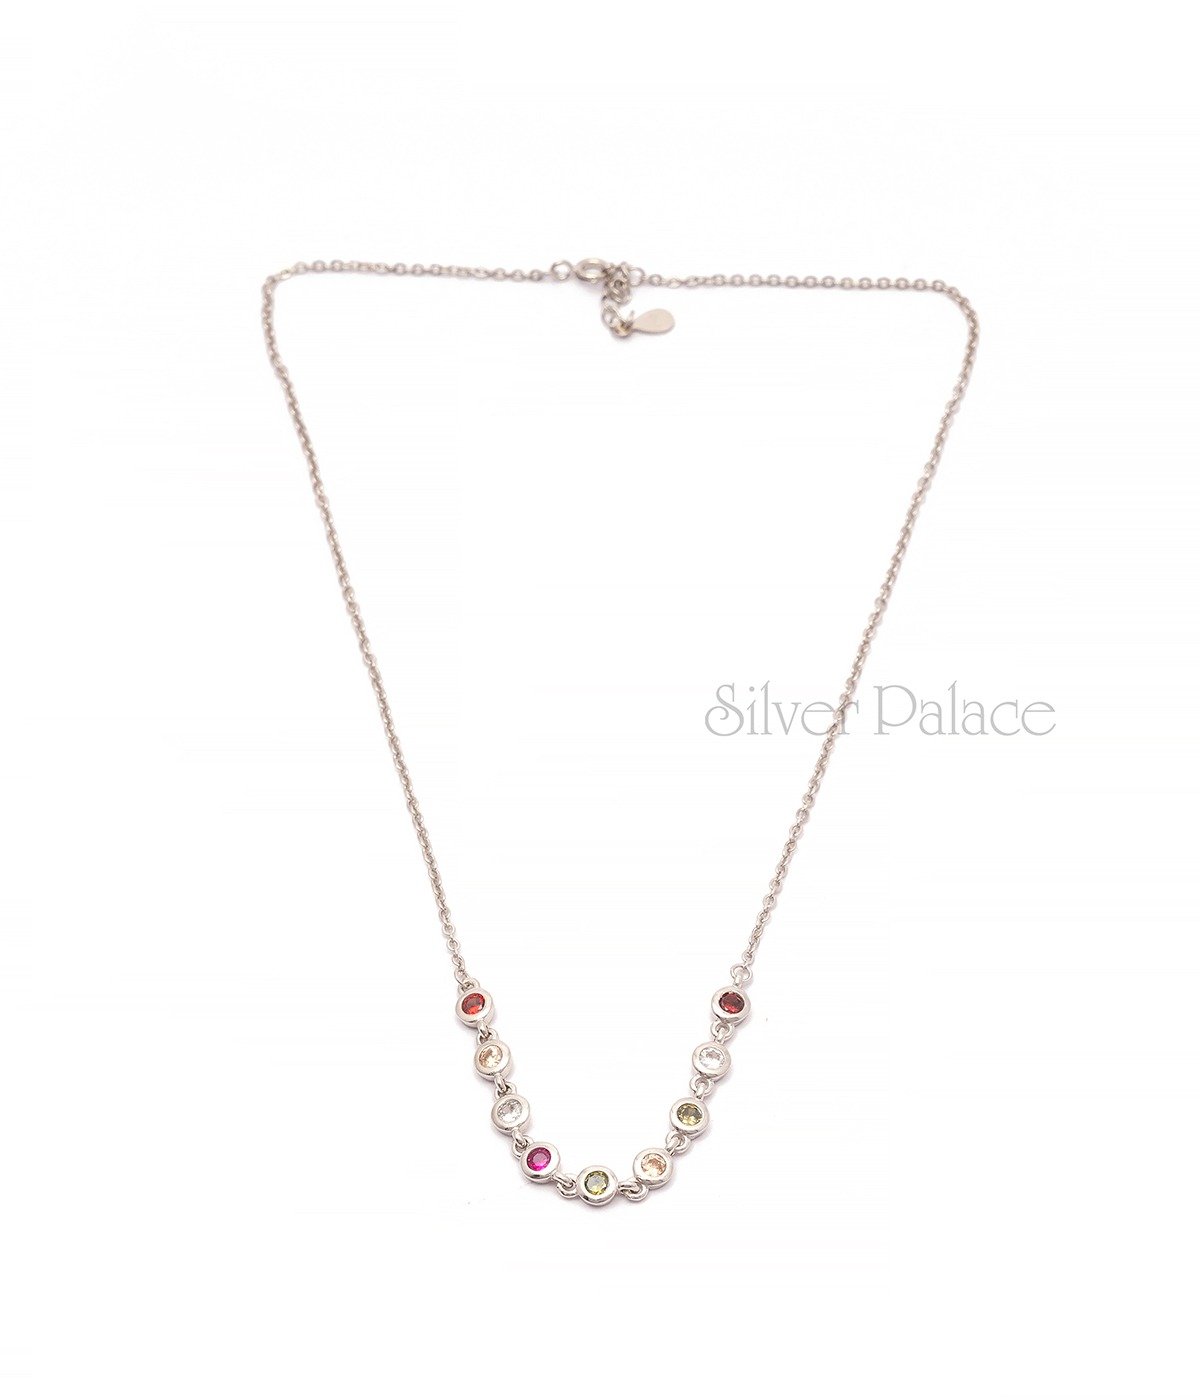 92.5 STERLING SILVER TINY MULTICOLOUR STONE STUDDED PENDANT CHAIN